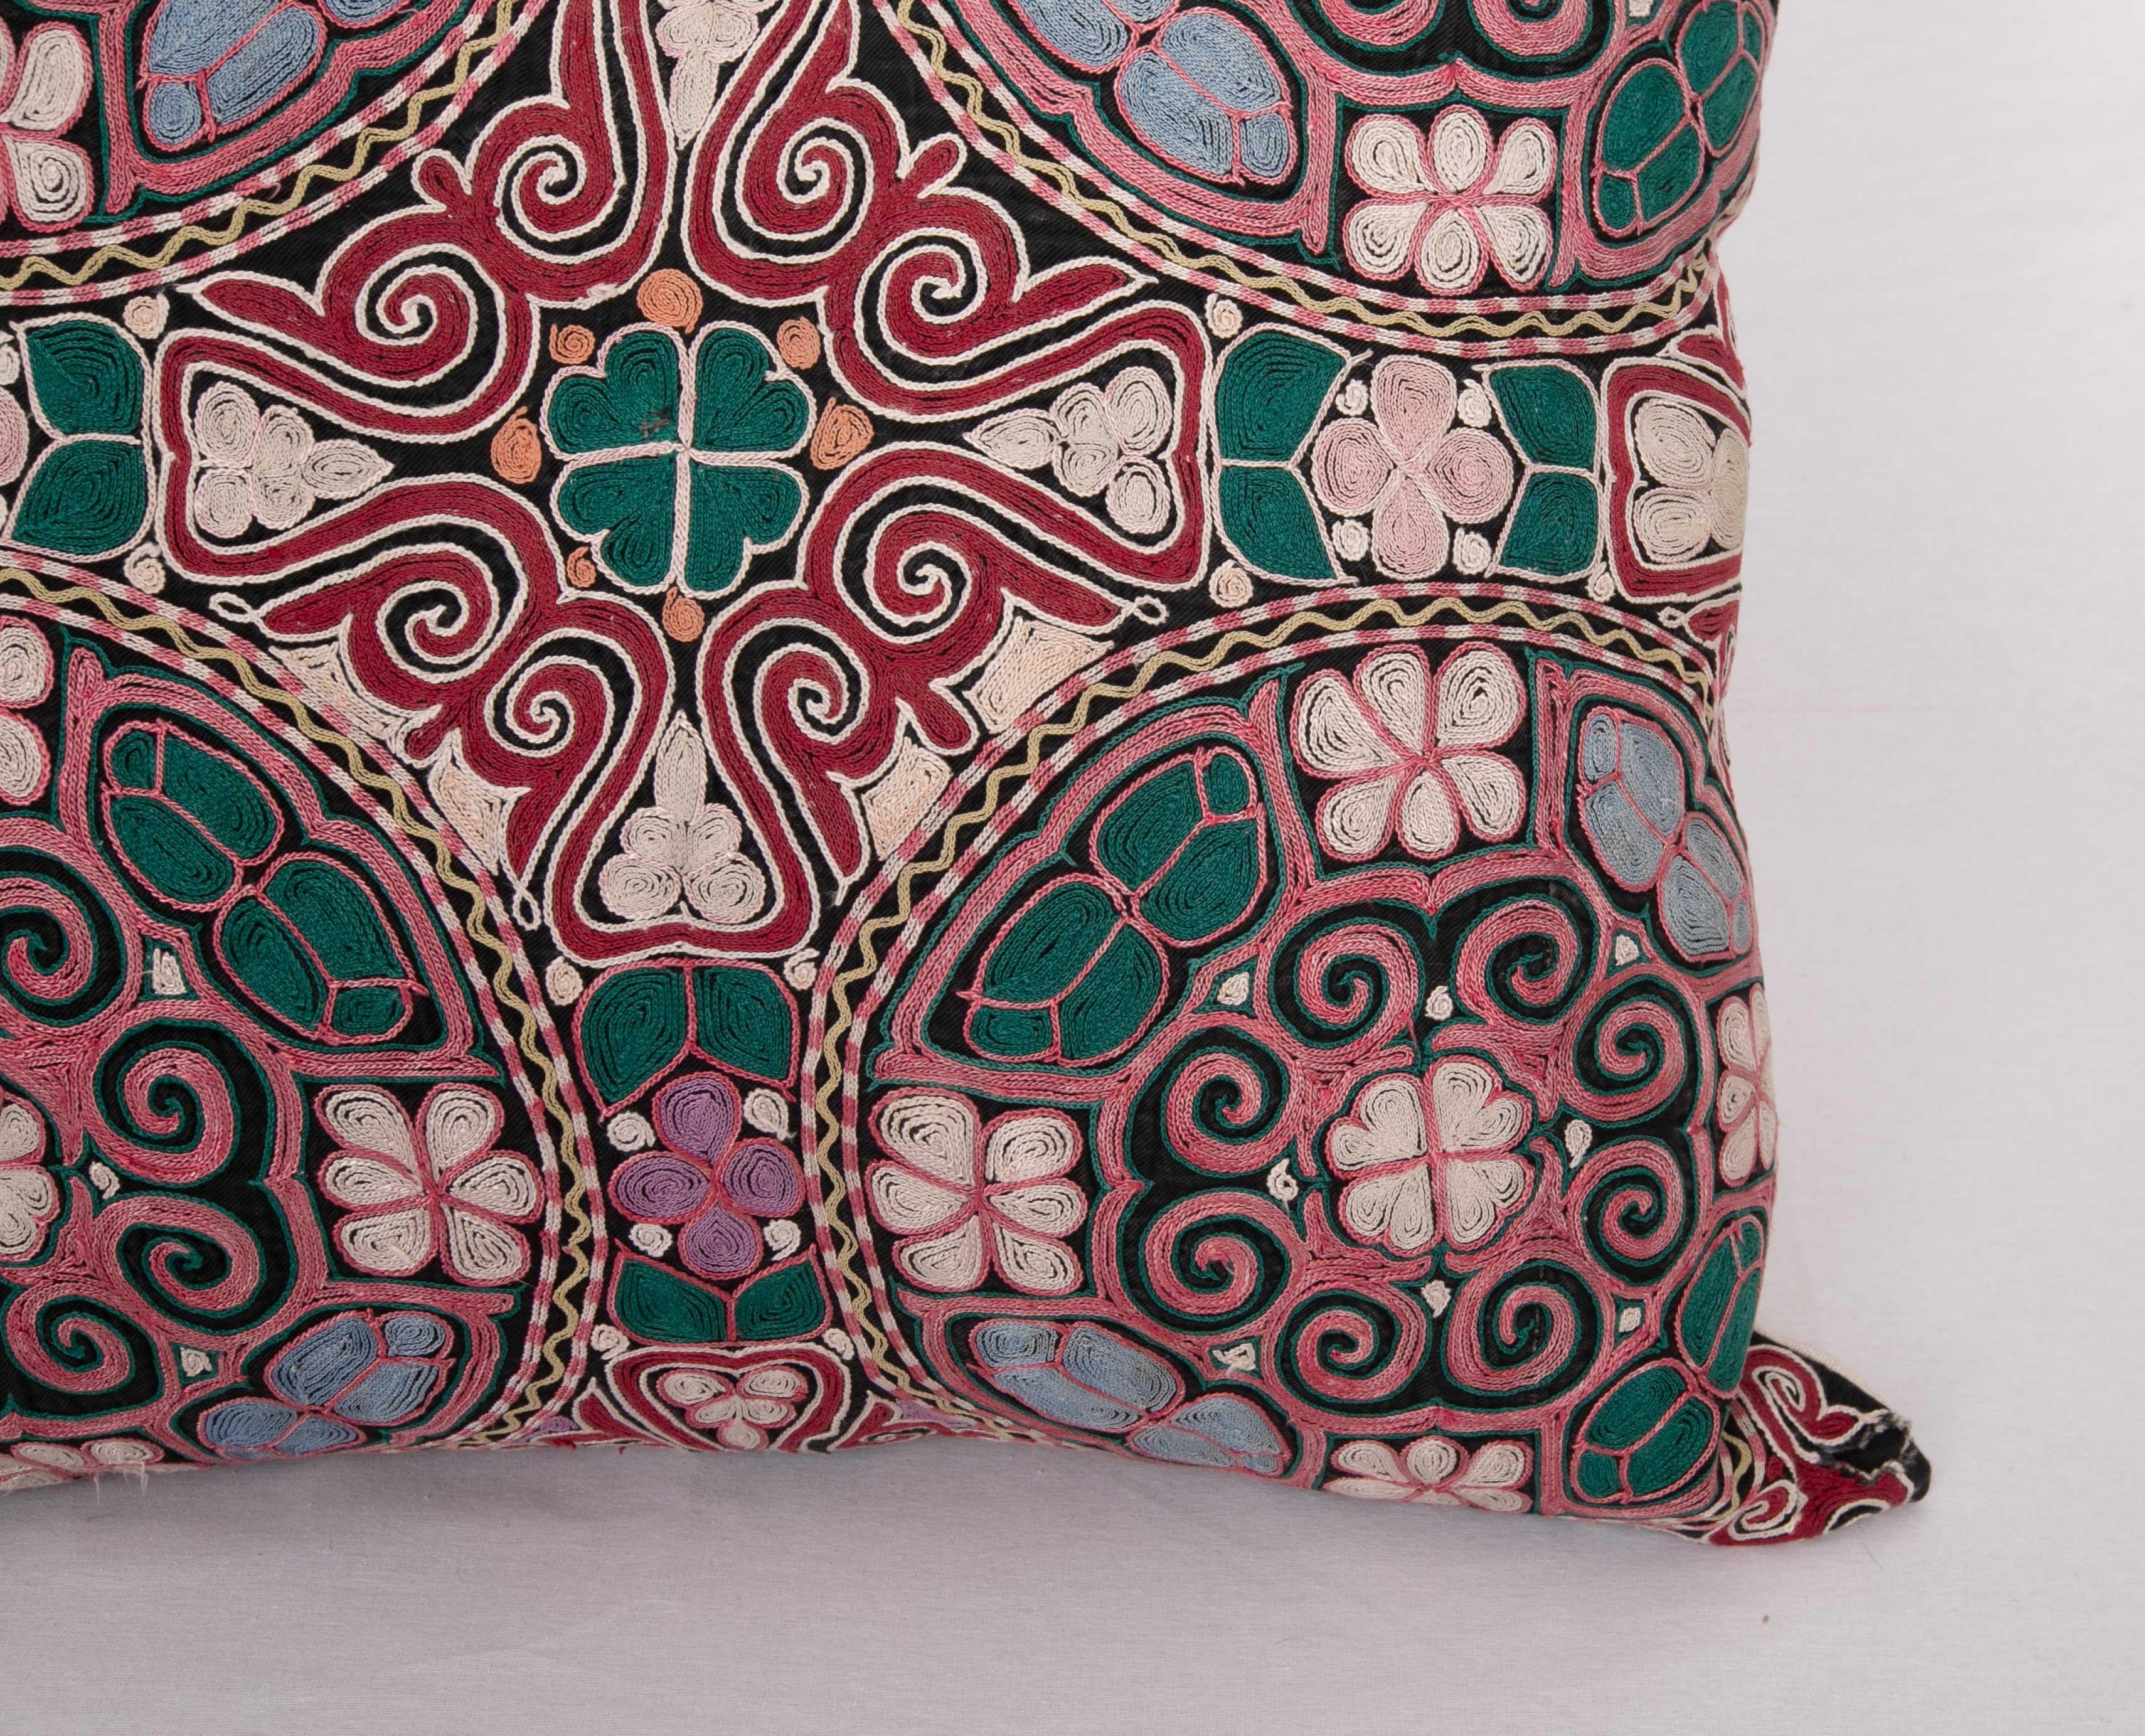 Embroidered Pillowcase made from a mid 20th. C. Kazakh / Kyrgyz Embroidery For Sale